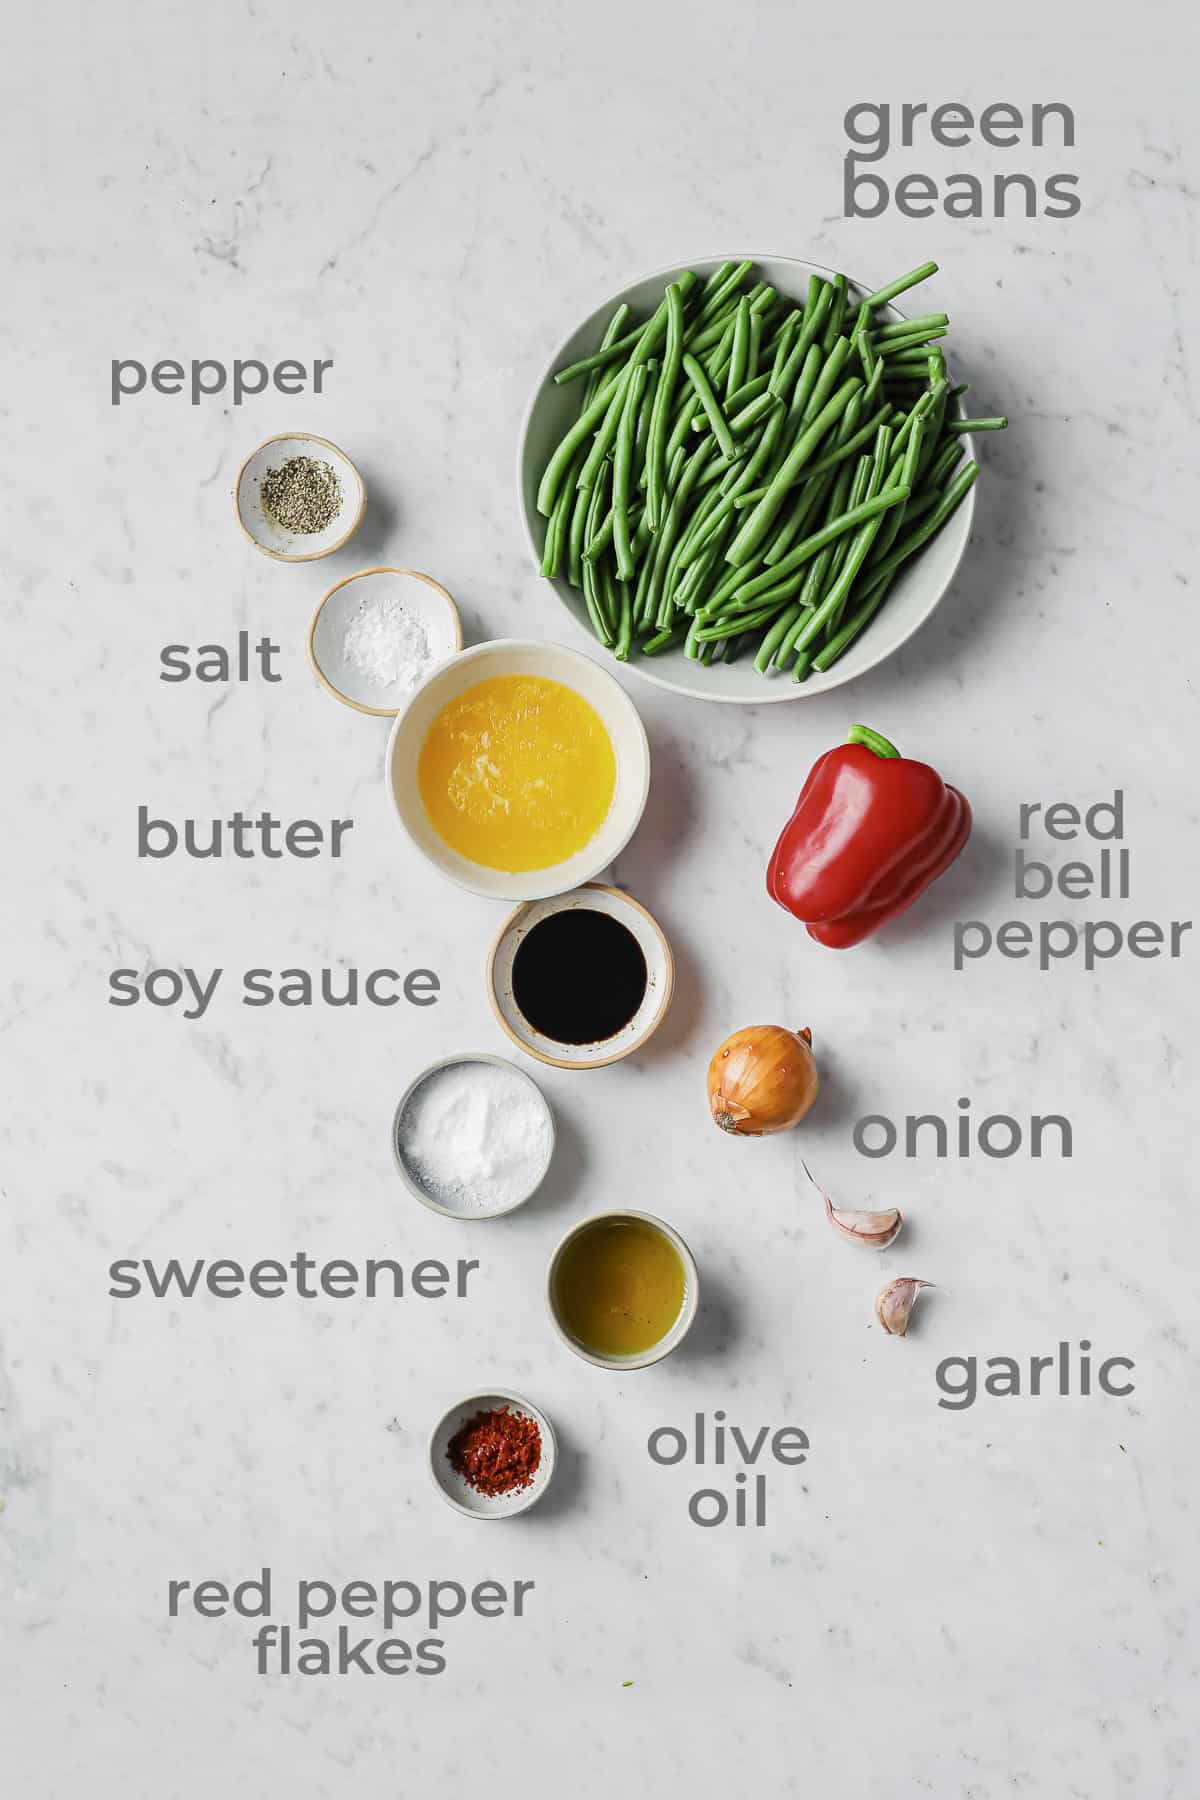 ingredients for asian green beans - green beans, peppers, onions, garlic, soy sauce, butter, and brown sugar